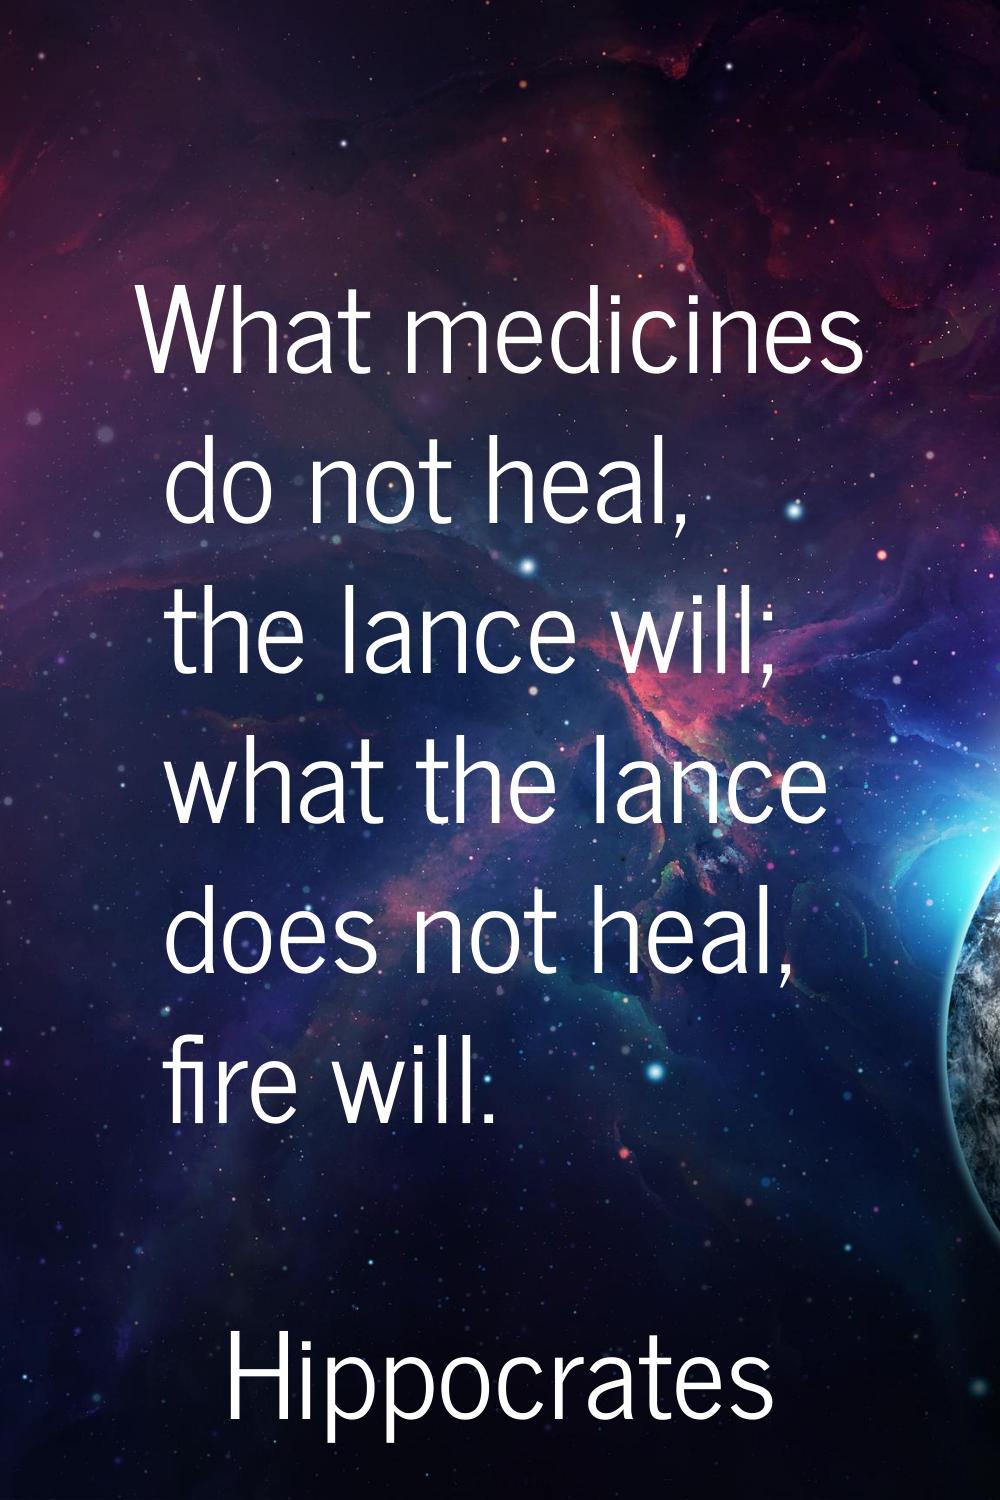 What medicines do not heal, the lance will; what the lance does not heal, fire will.